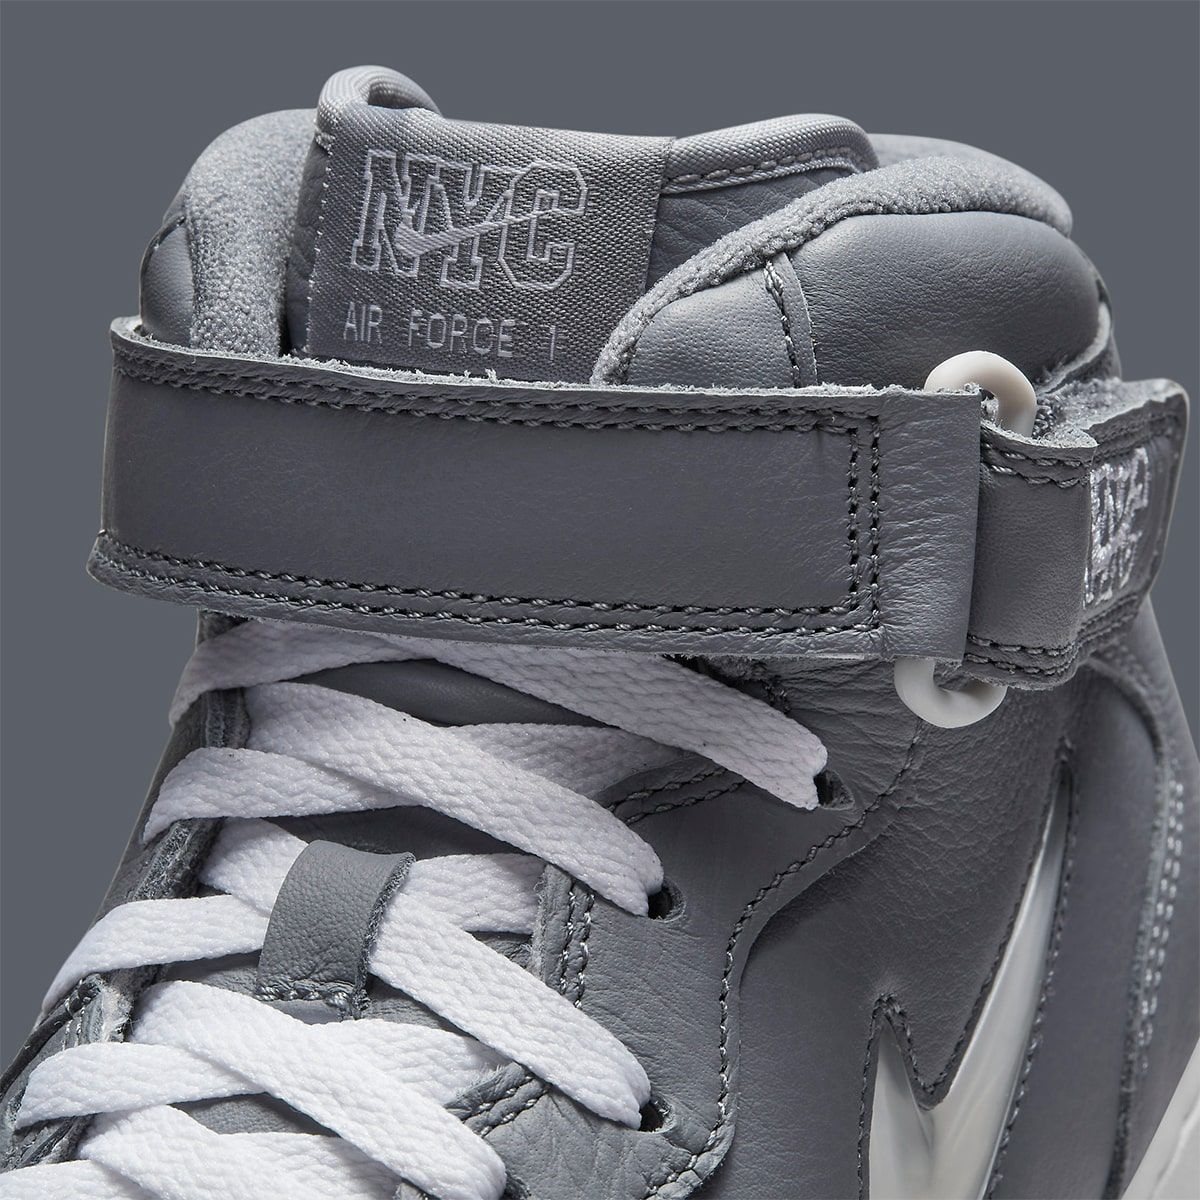 Where to Buy the Nike Air Force 1 Mid “Cool Grey